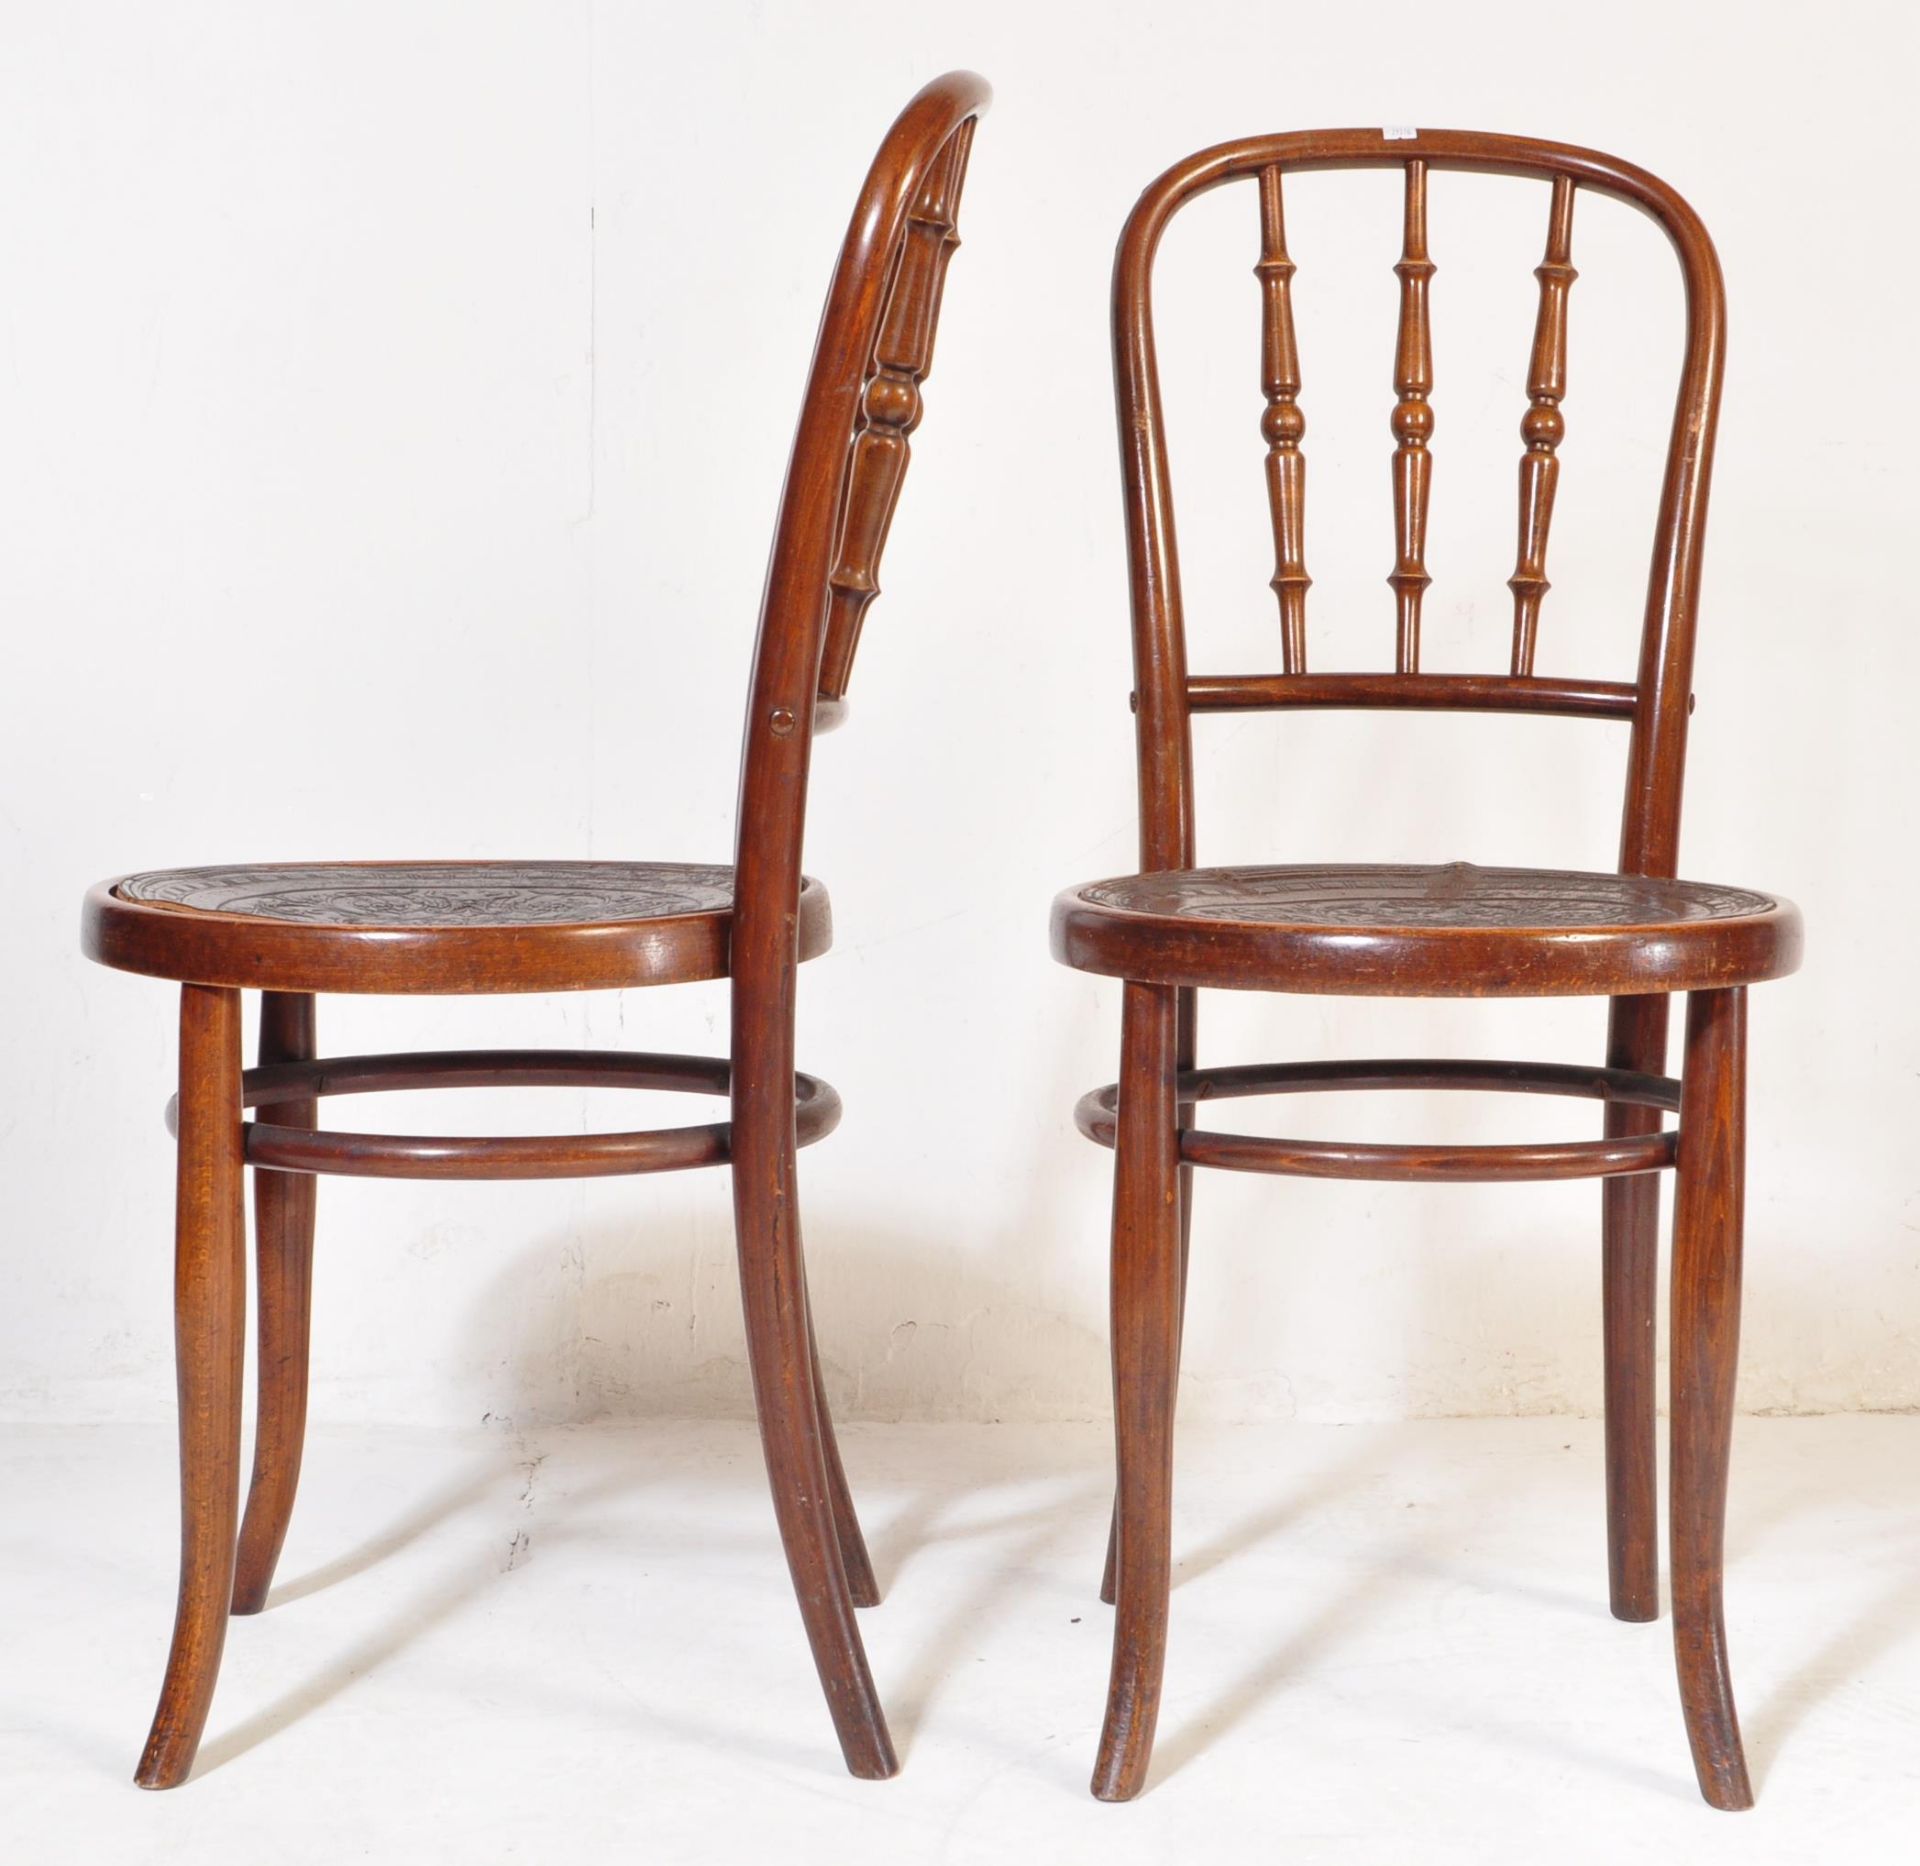 PAIR OF MID 20TH CENTURY BENTWOOD CAFE CHAIRS - Image 3 of 8